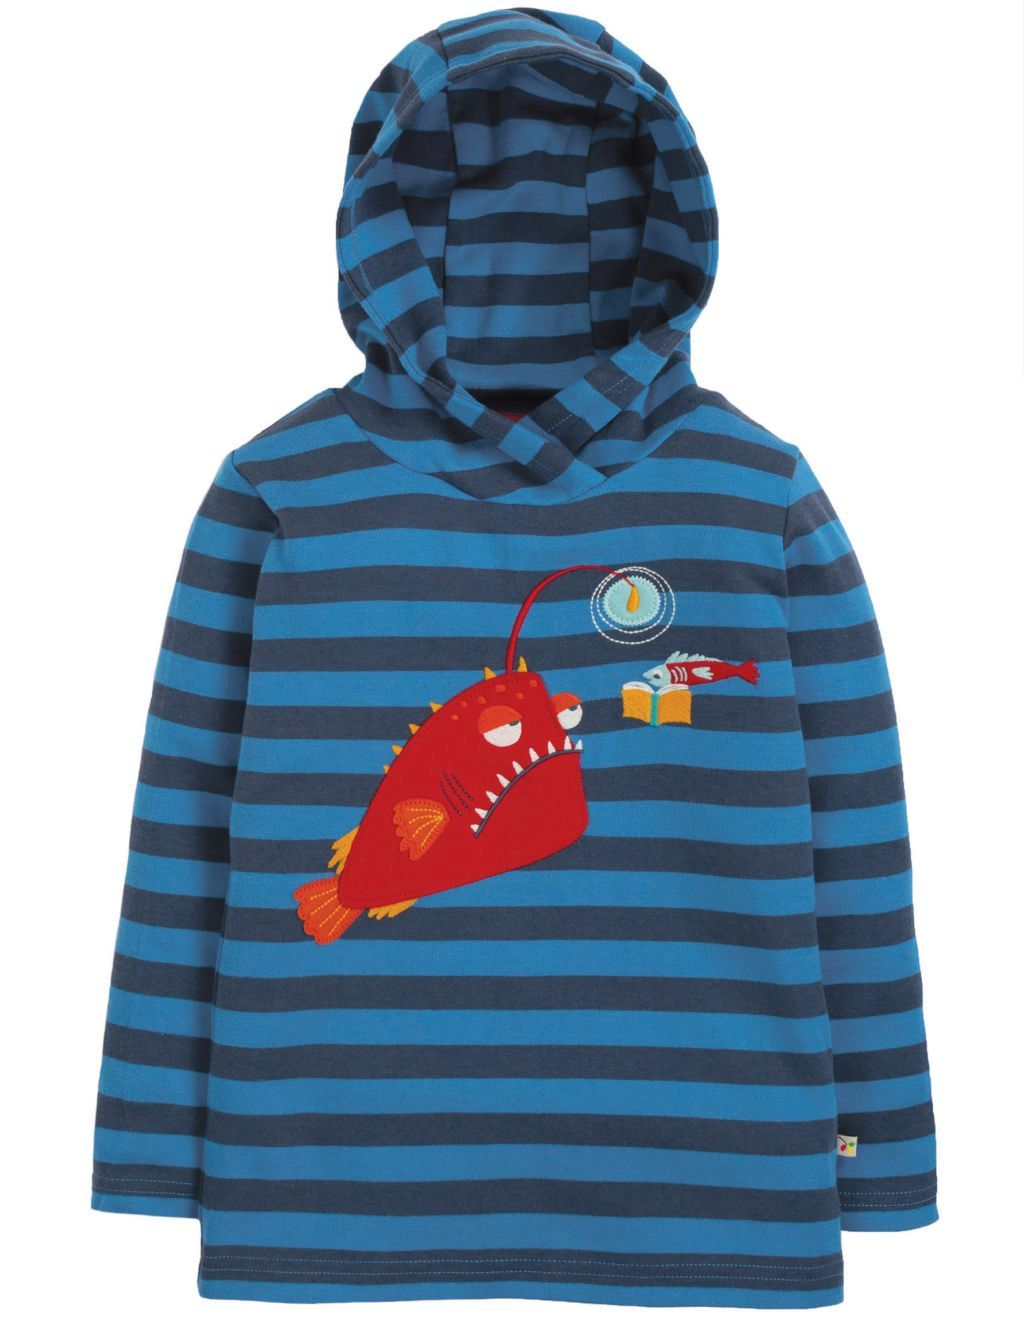 Campfire Hooded Top sail blue stripe/Angler Fish 128/134